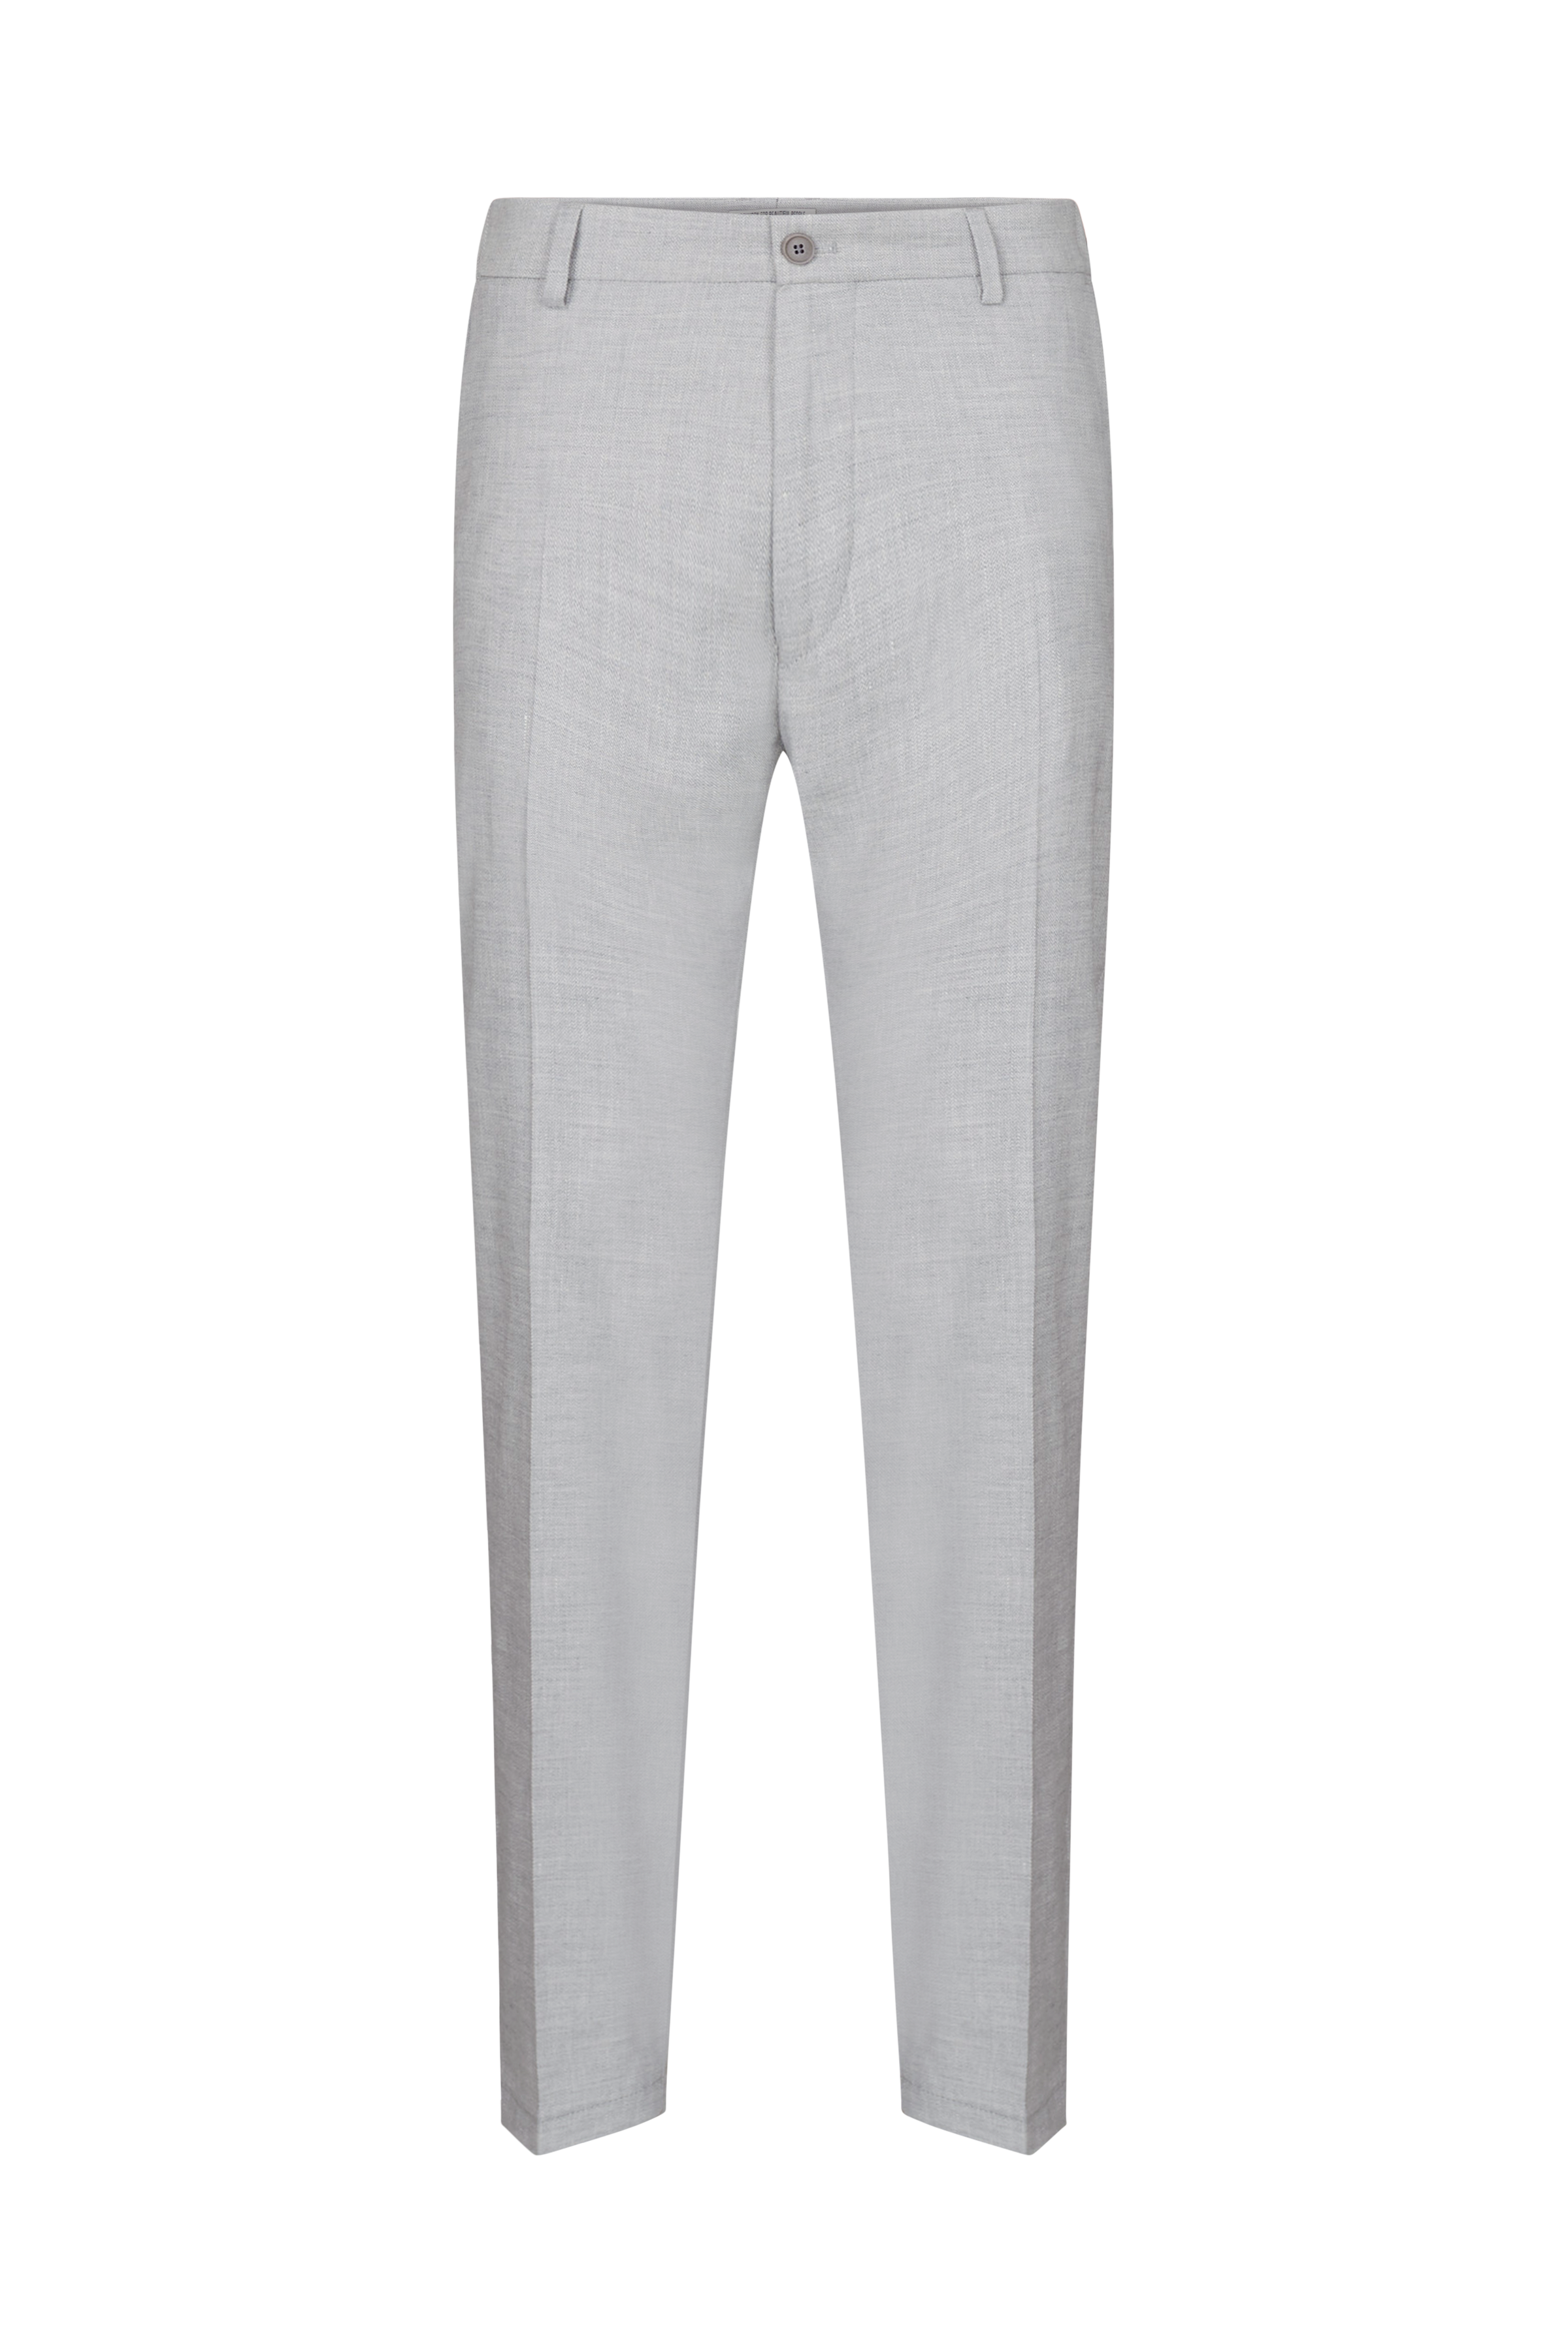 DRYKORN Ajend Trouser 138339